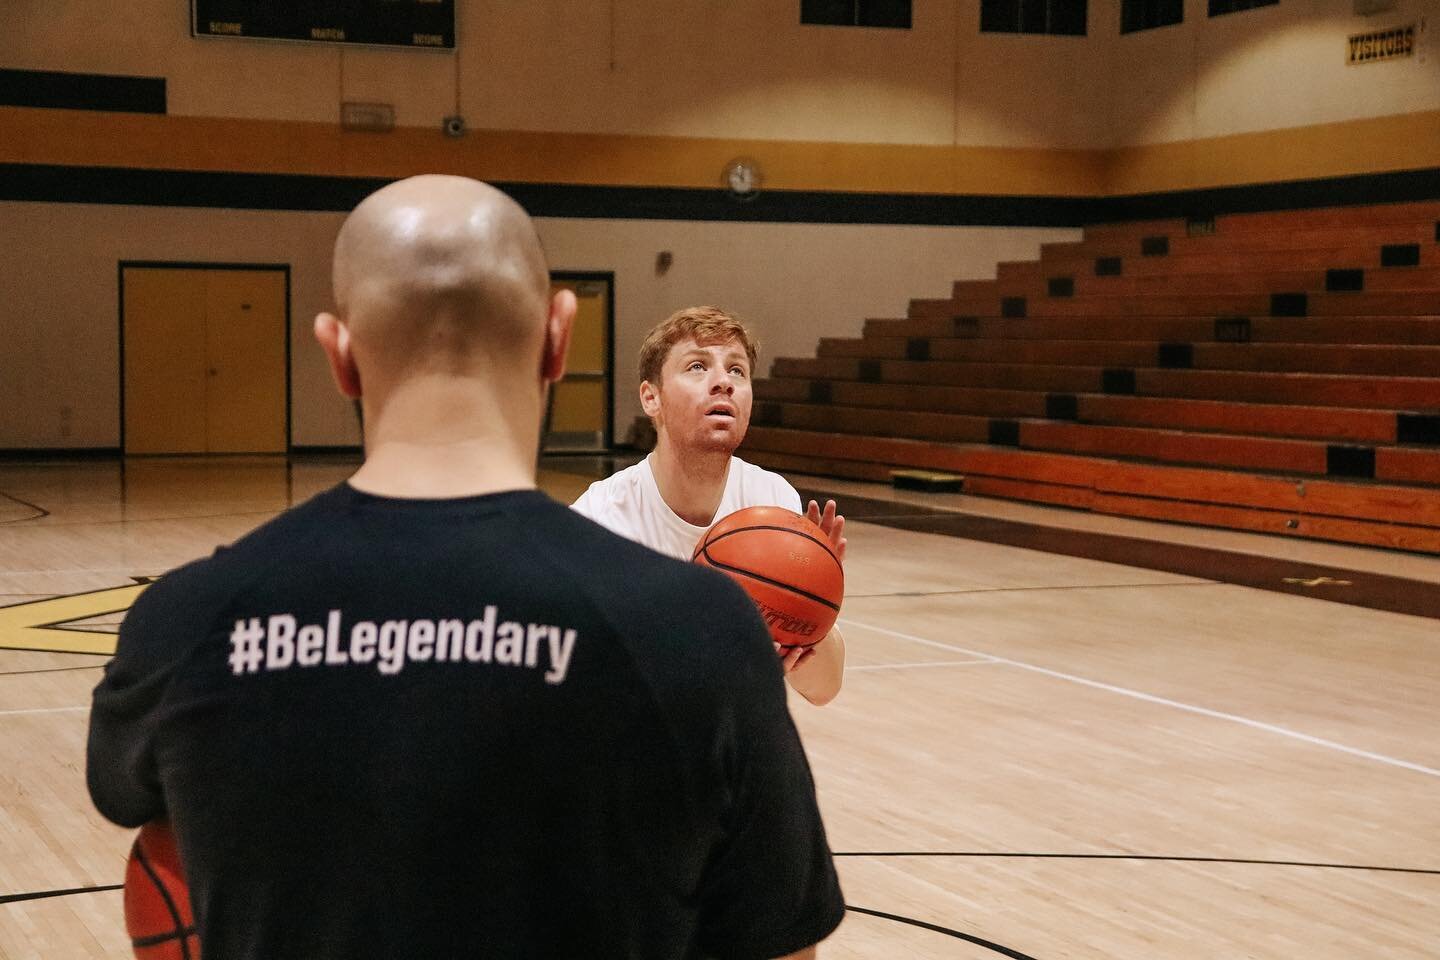 Be Legendary... #throwback to the early mornings and late nights just trying to get better...
-
-
-
@coach_julianp 
@treycasaus 
@jameshealy2407 
-
-
-
#legendary #steadfast #performance #training #basketball #hooper #handles 
#fundamentals #courttim